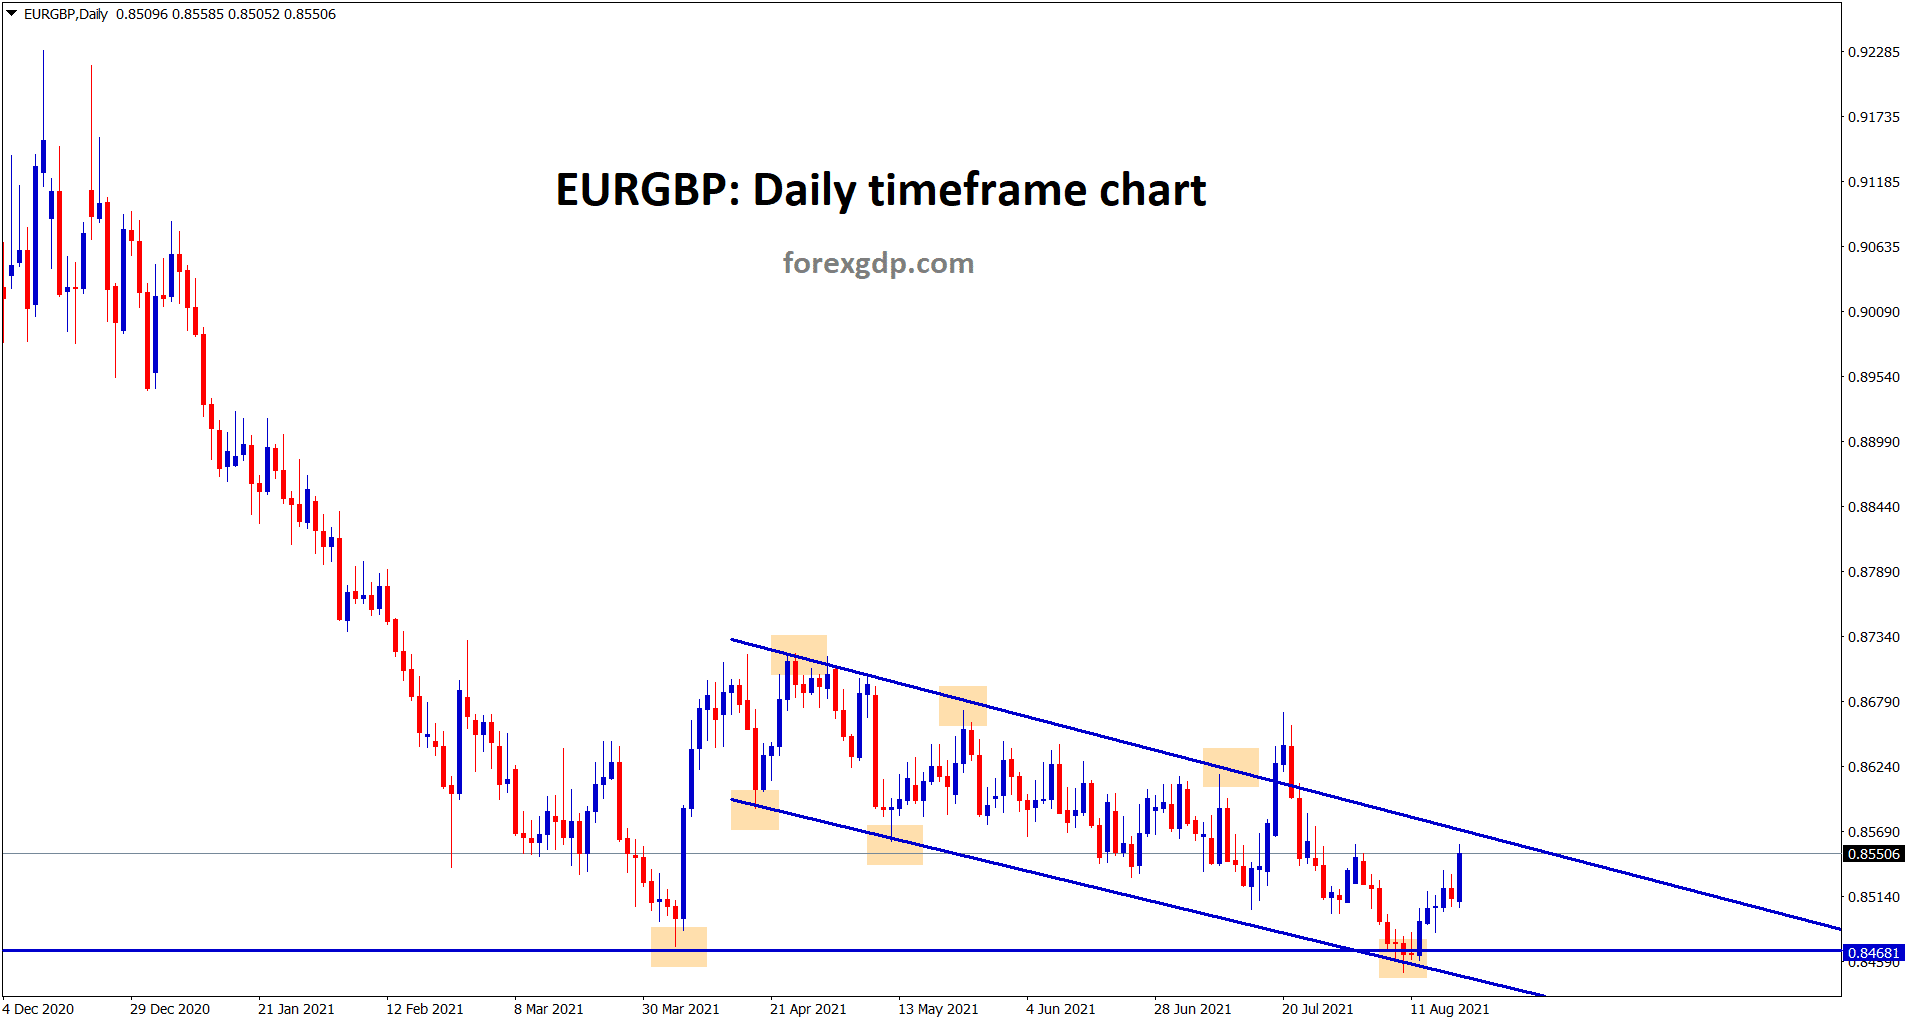 EURGBP bounced back from the horizontal support and now goig to reach the lower high of the descending channel line